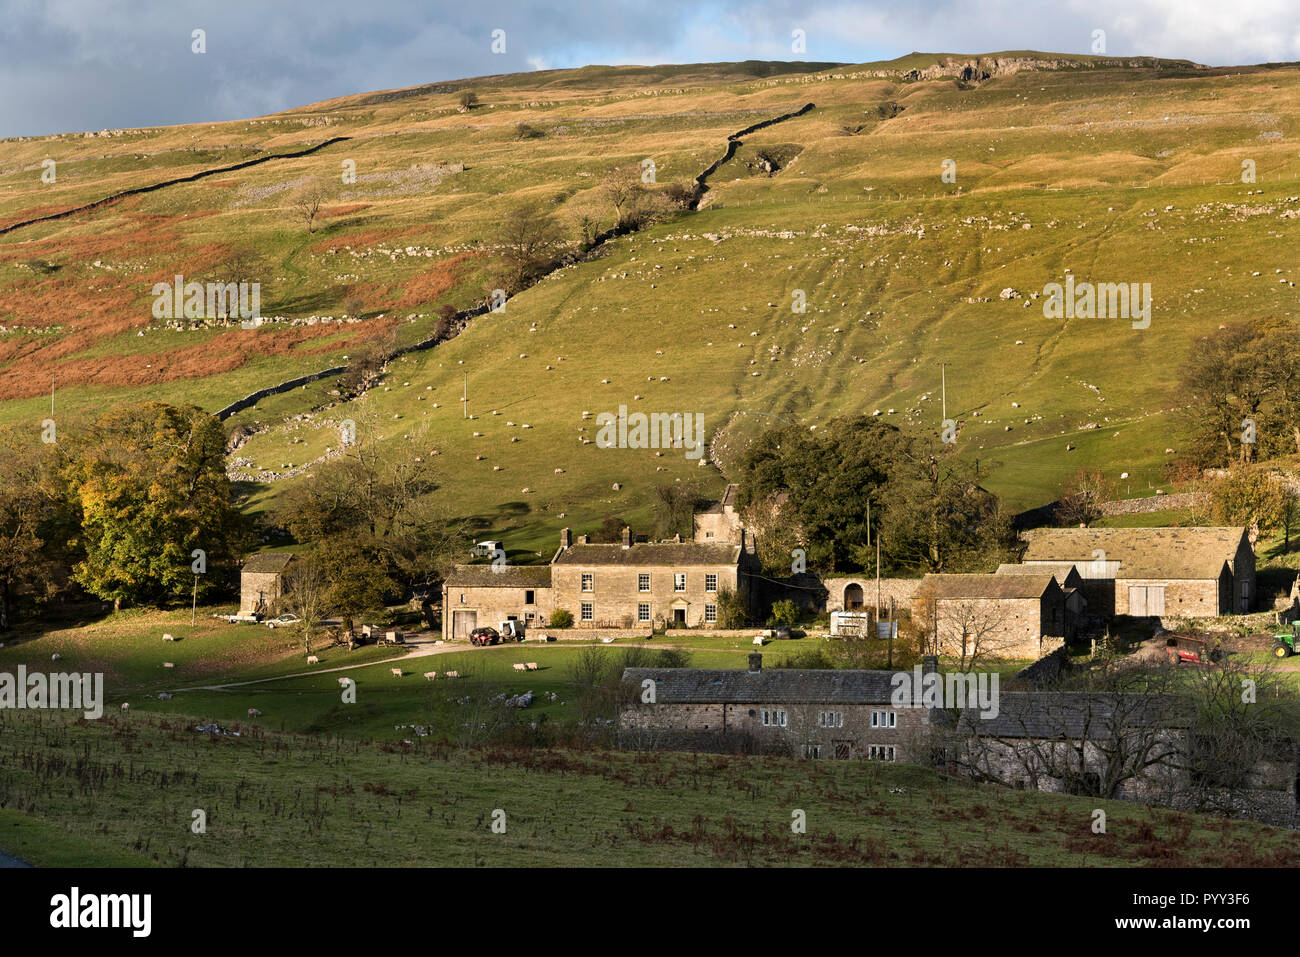 Autumn light shining on the farming hamlet of Yockenthwaite, Langstrothdale, Yorkshire Dales National Park, with sheep grazing on the hills. Stock Photo